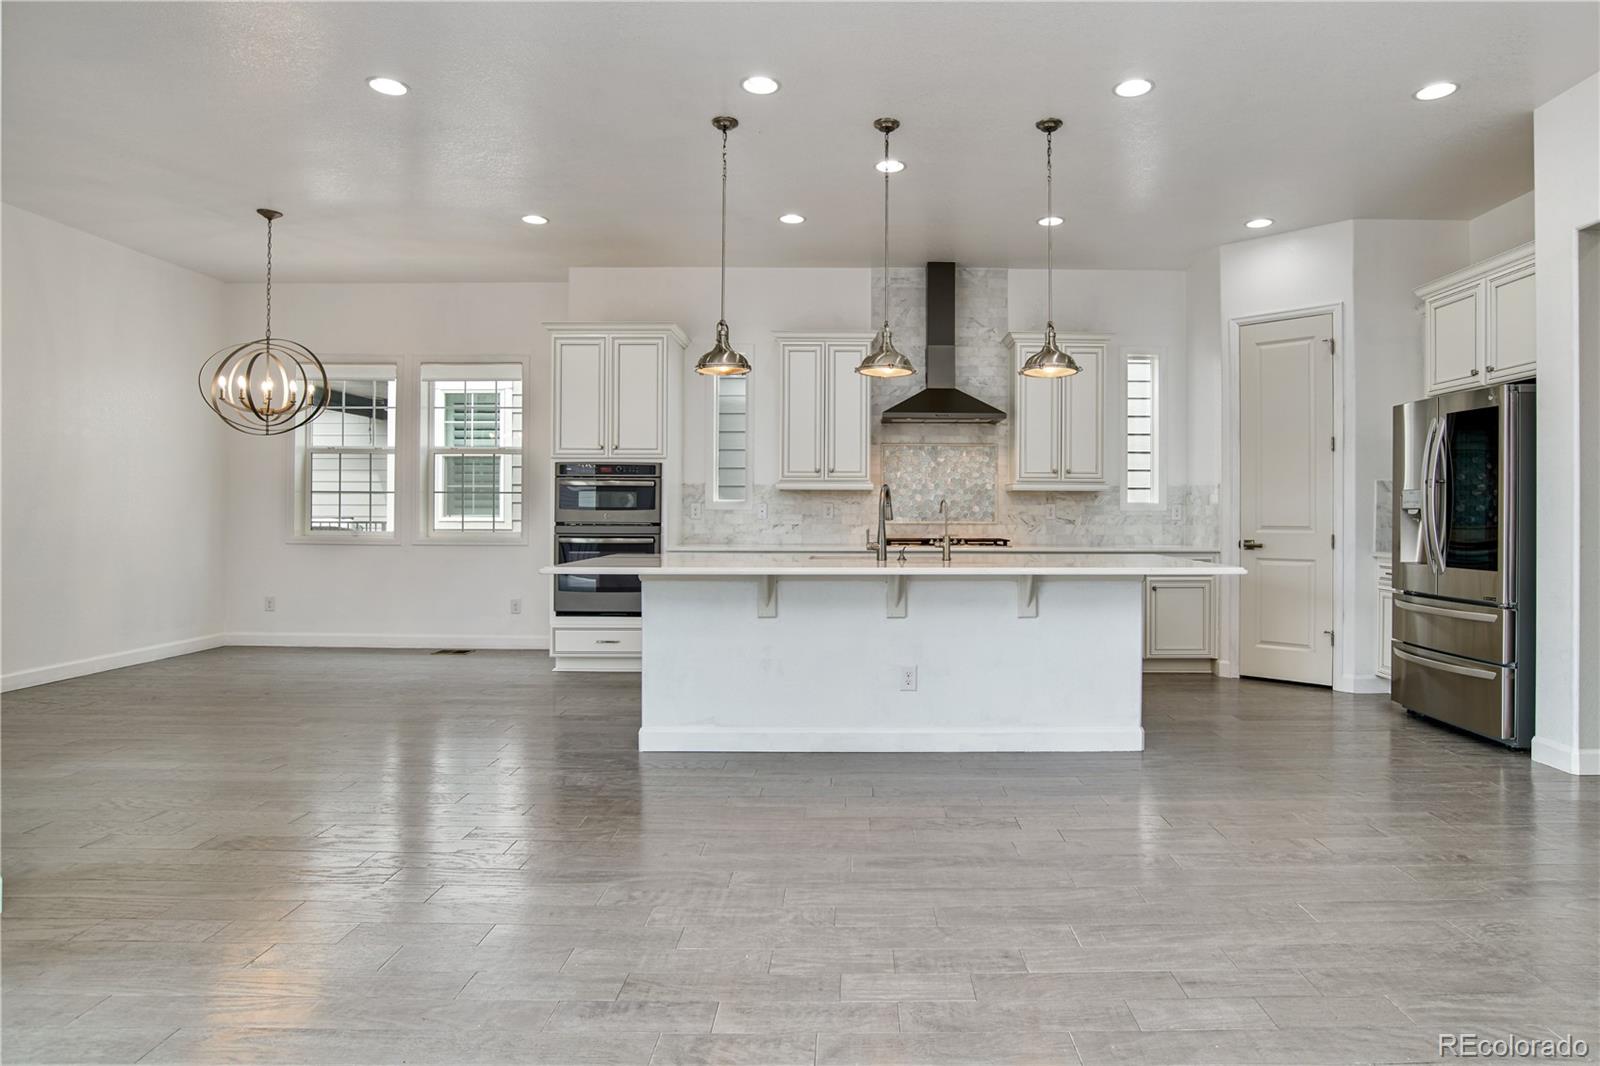 a large kitchen with stainless steel appliances kitchen island a large counter top and a stove top oven